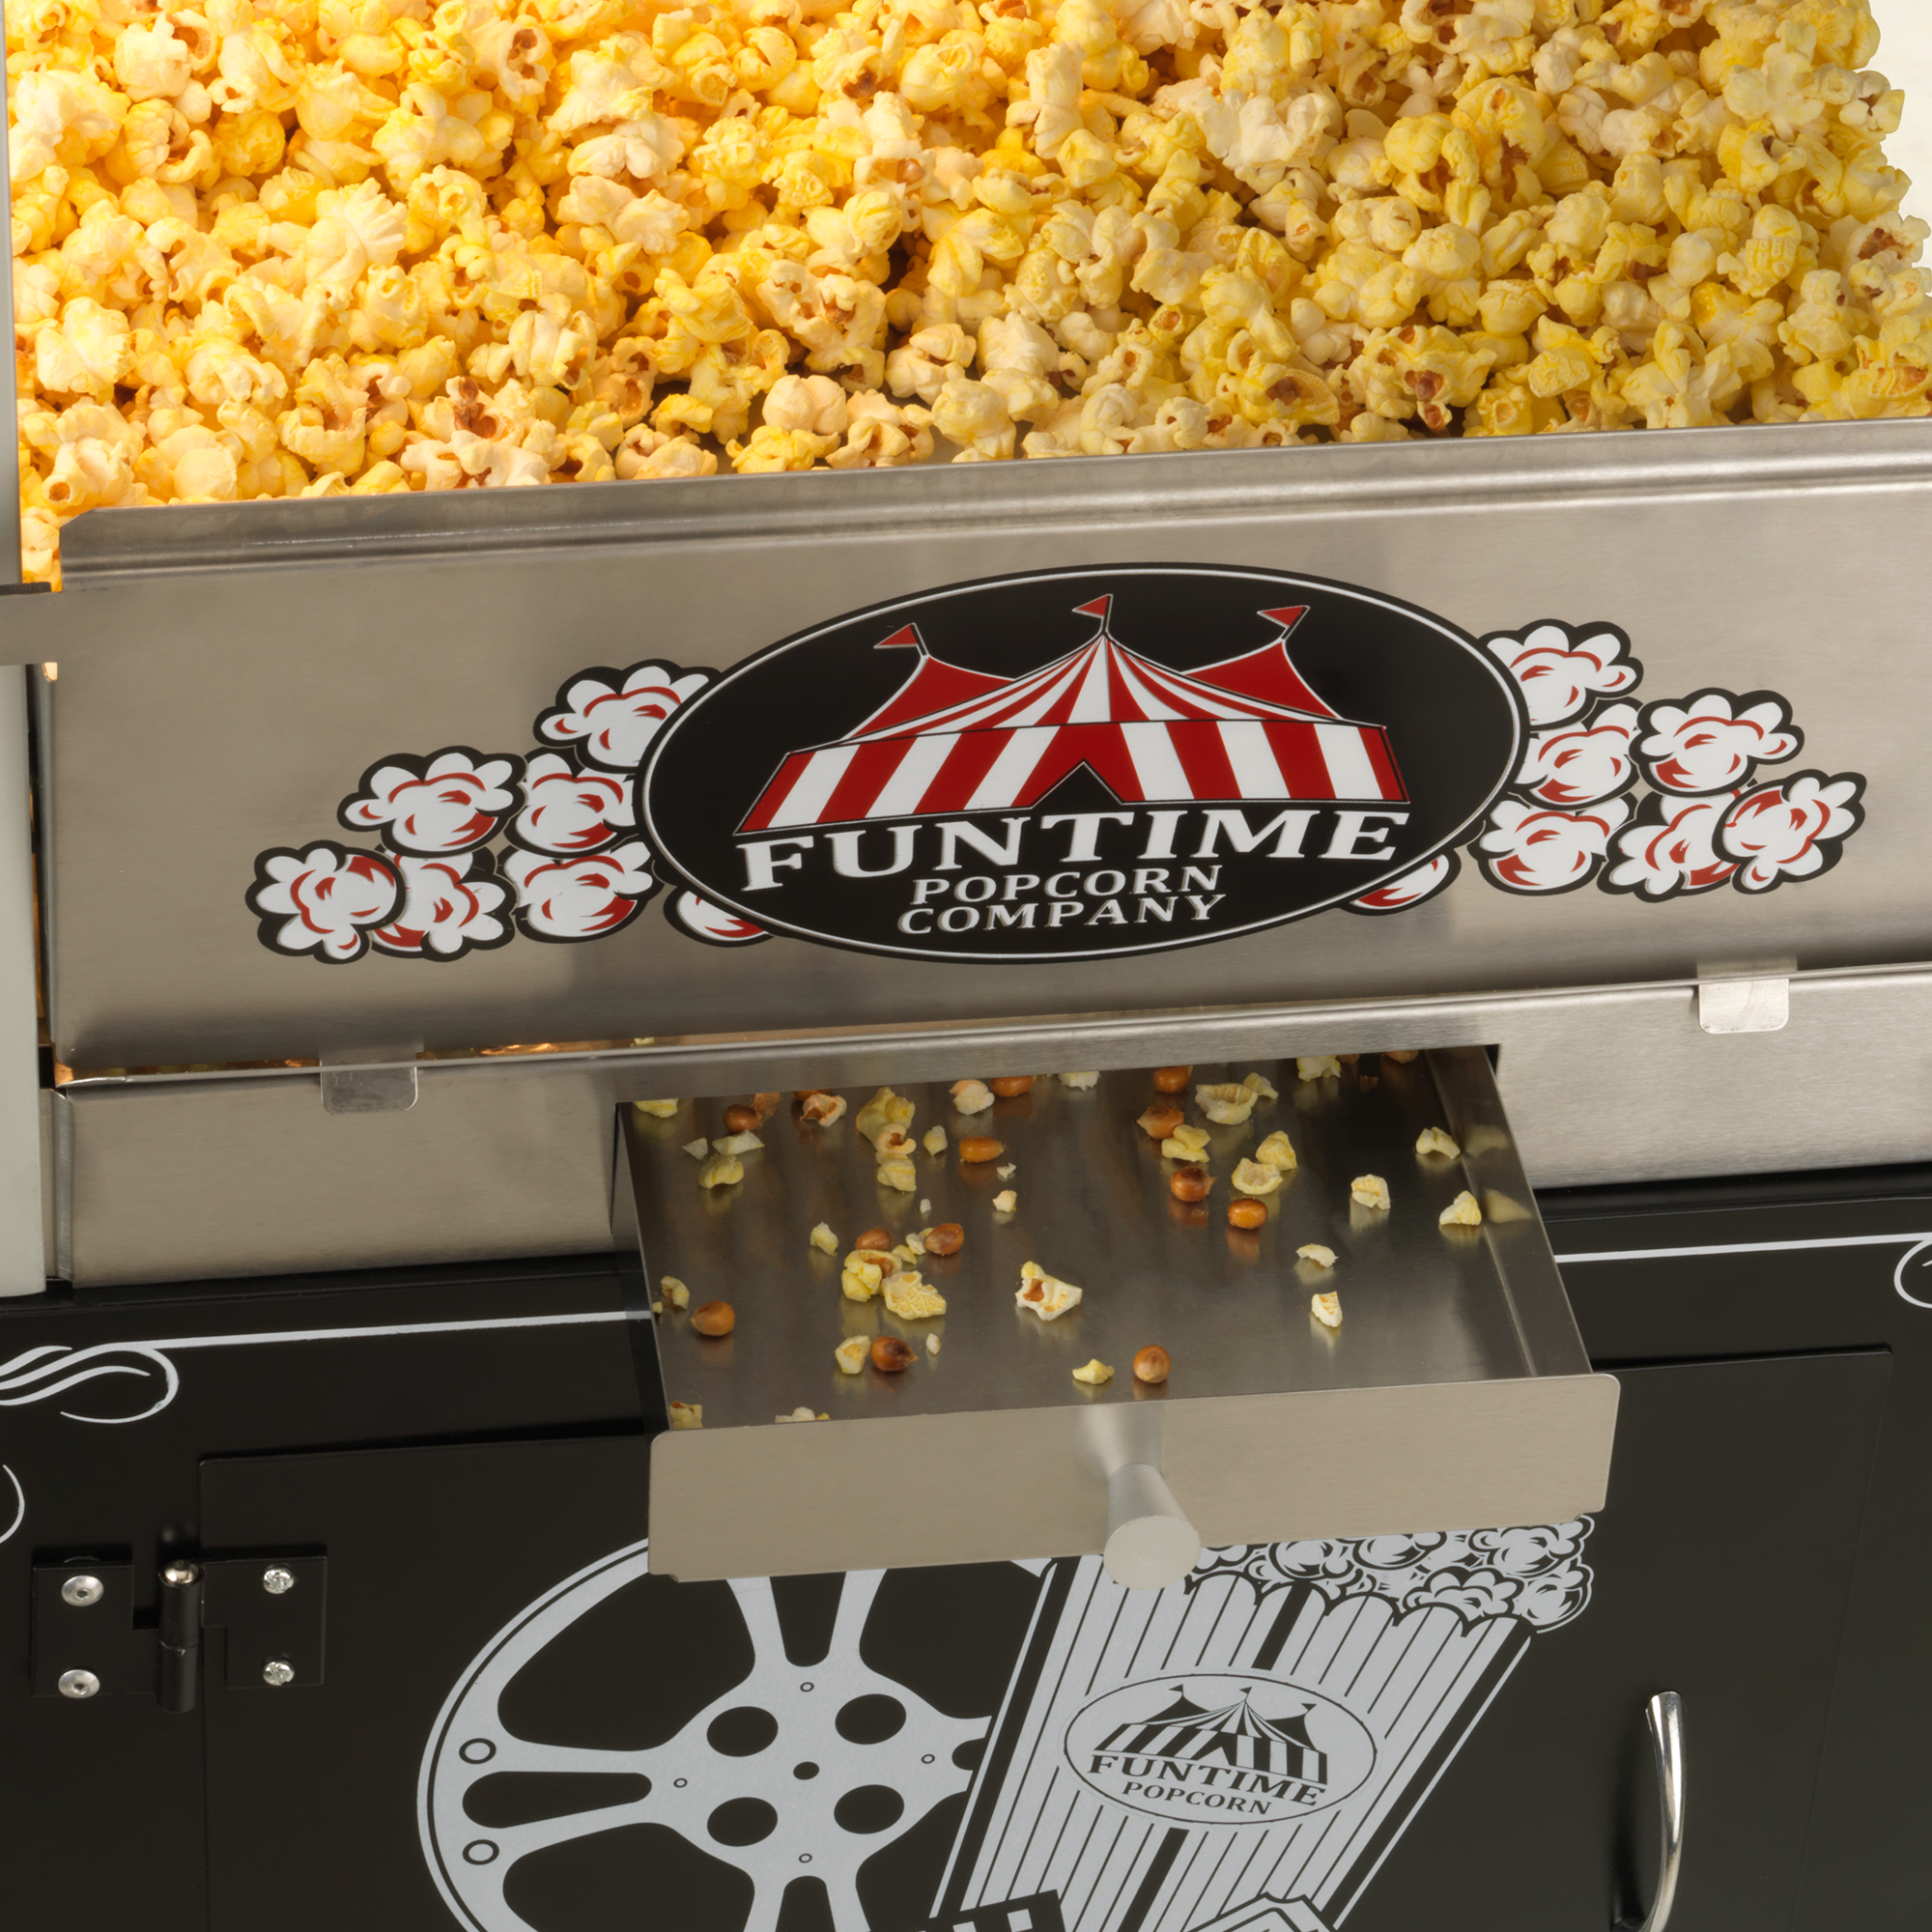 Theater Style Popcorn Popper - Ultimate Inflatables American Fork UT